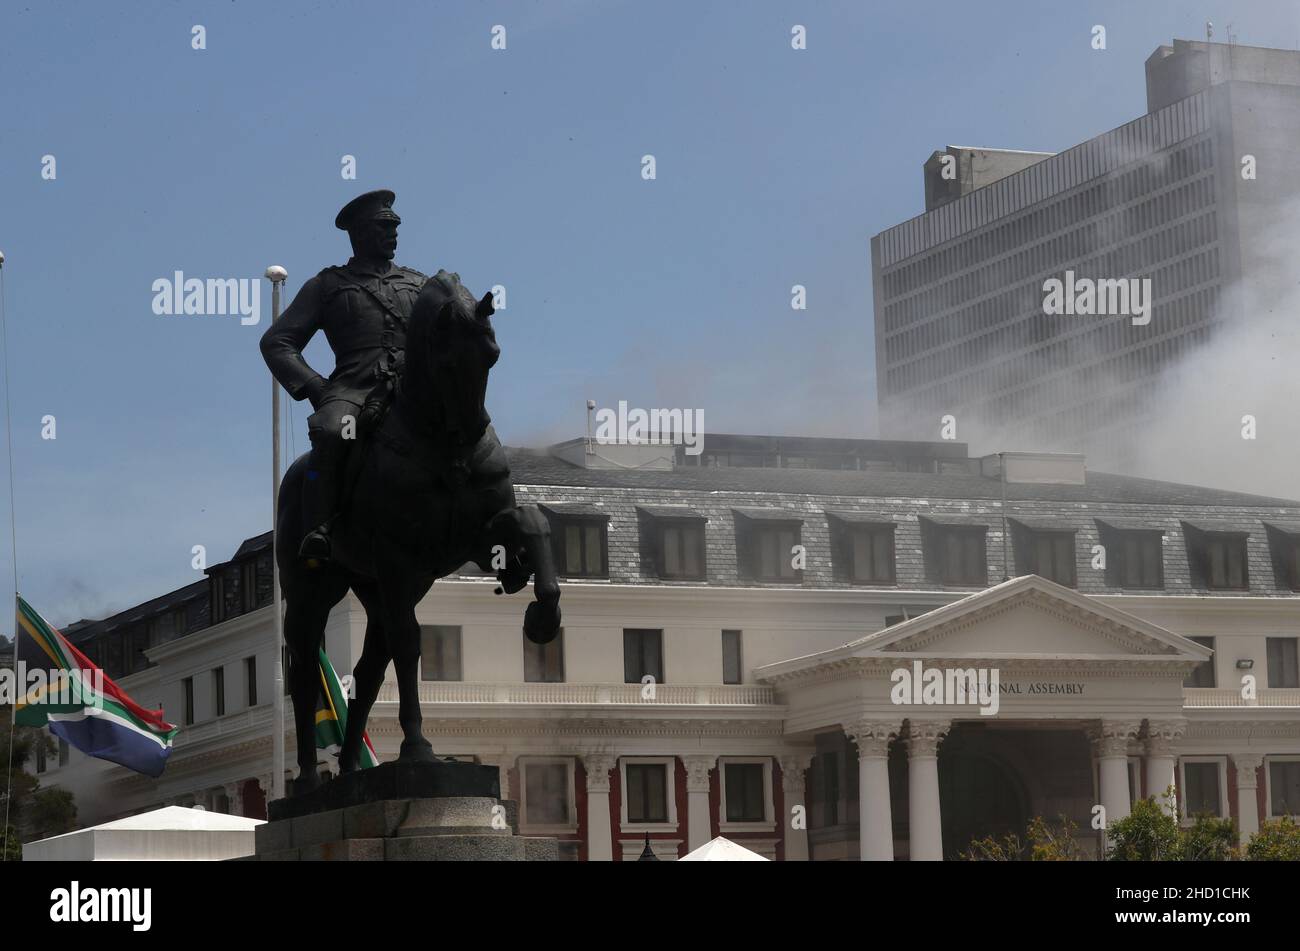 The statue of Louis Botha, former prime minister of the union of South Africa, is seen in front of the parliament where a fire broke out in Cape Town, South Africa, January 2, 2022. REUTERS/Mike Hutchings Stock Photo